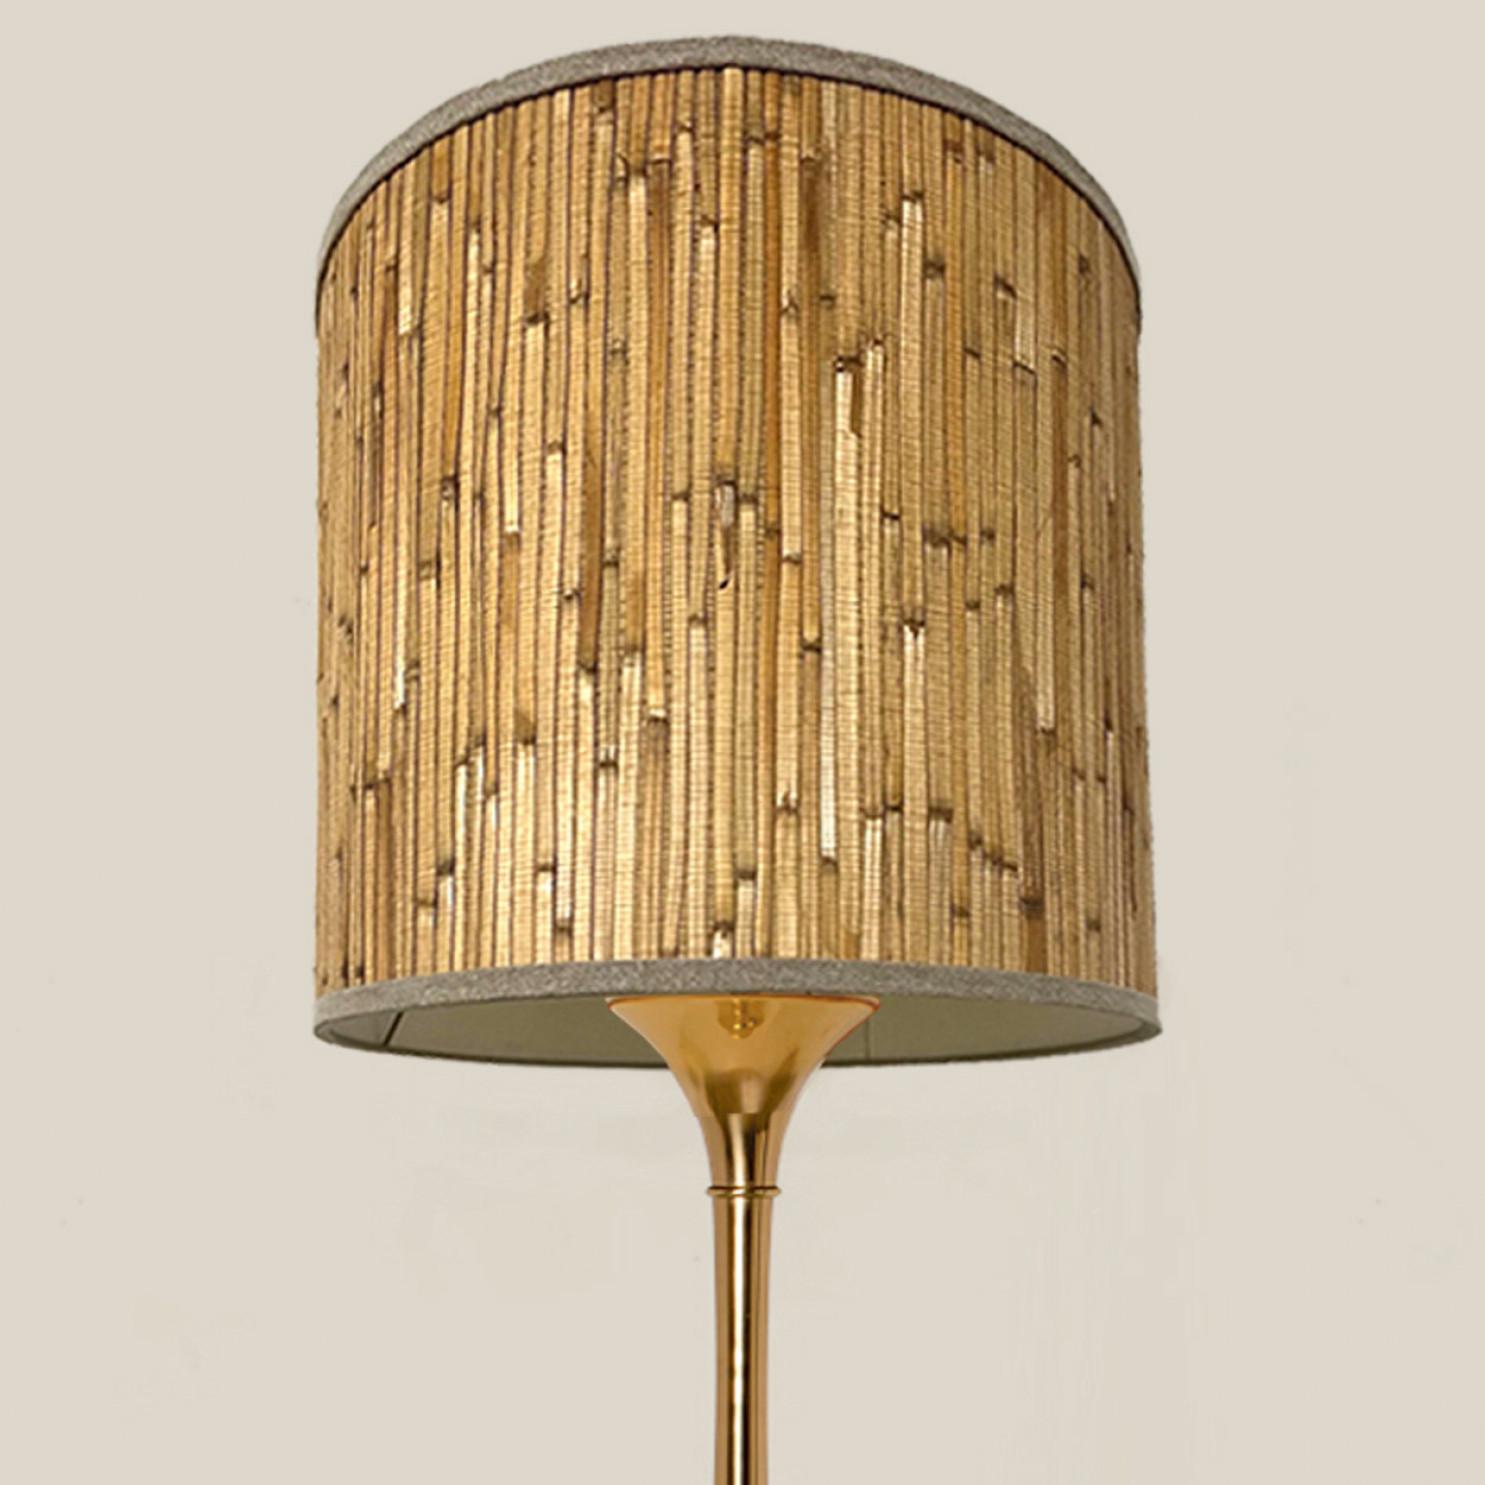 Pair of Floor Lamps Gold Brass and Bamoboo Shade by Ingo Maurer, Germany, 1968 For Sale 9